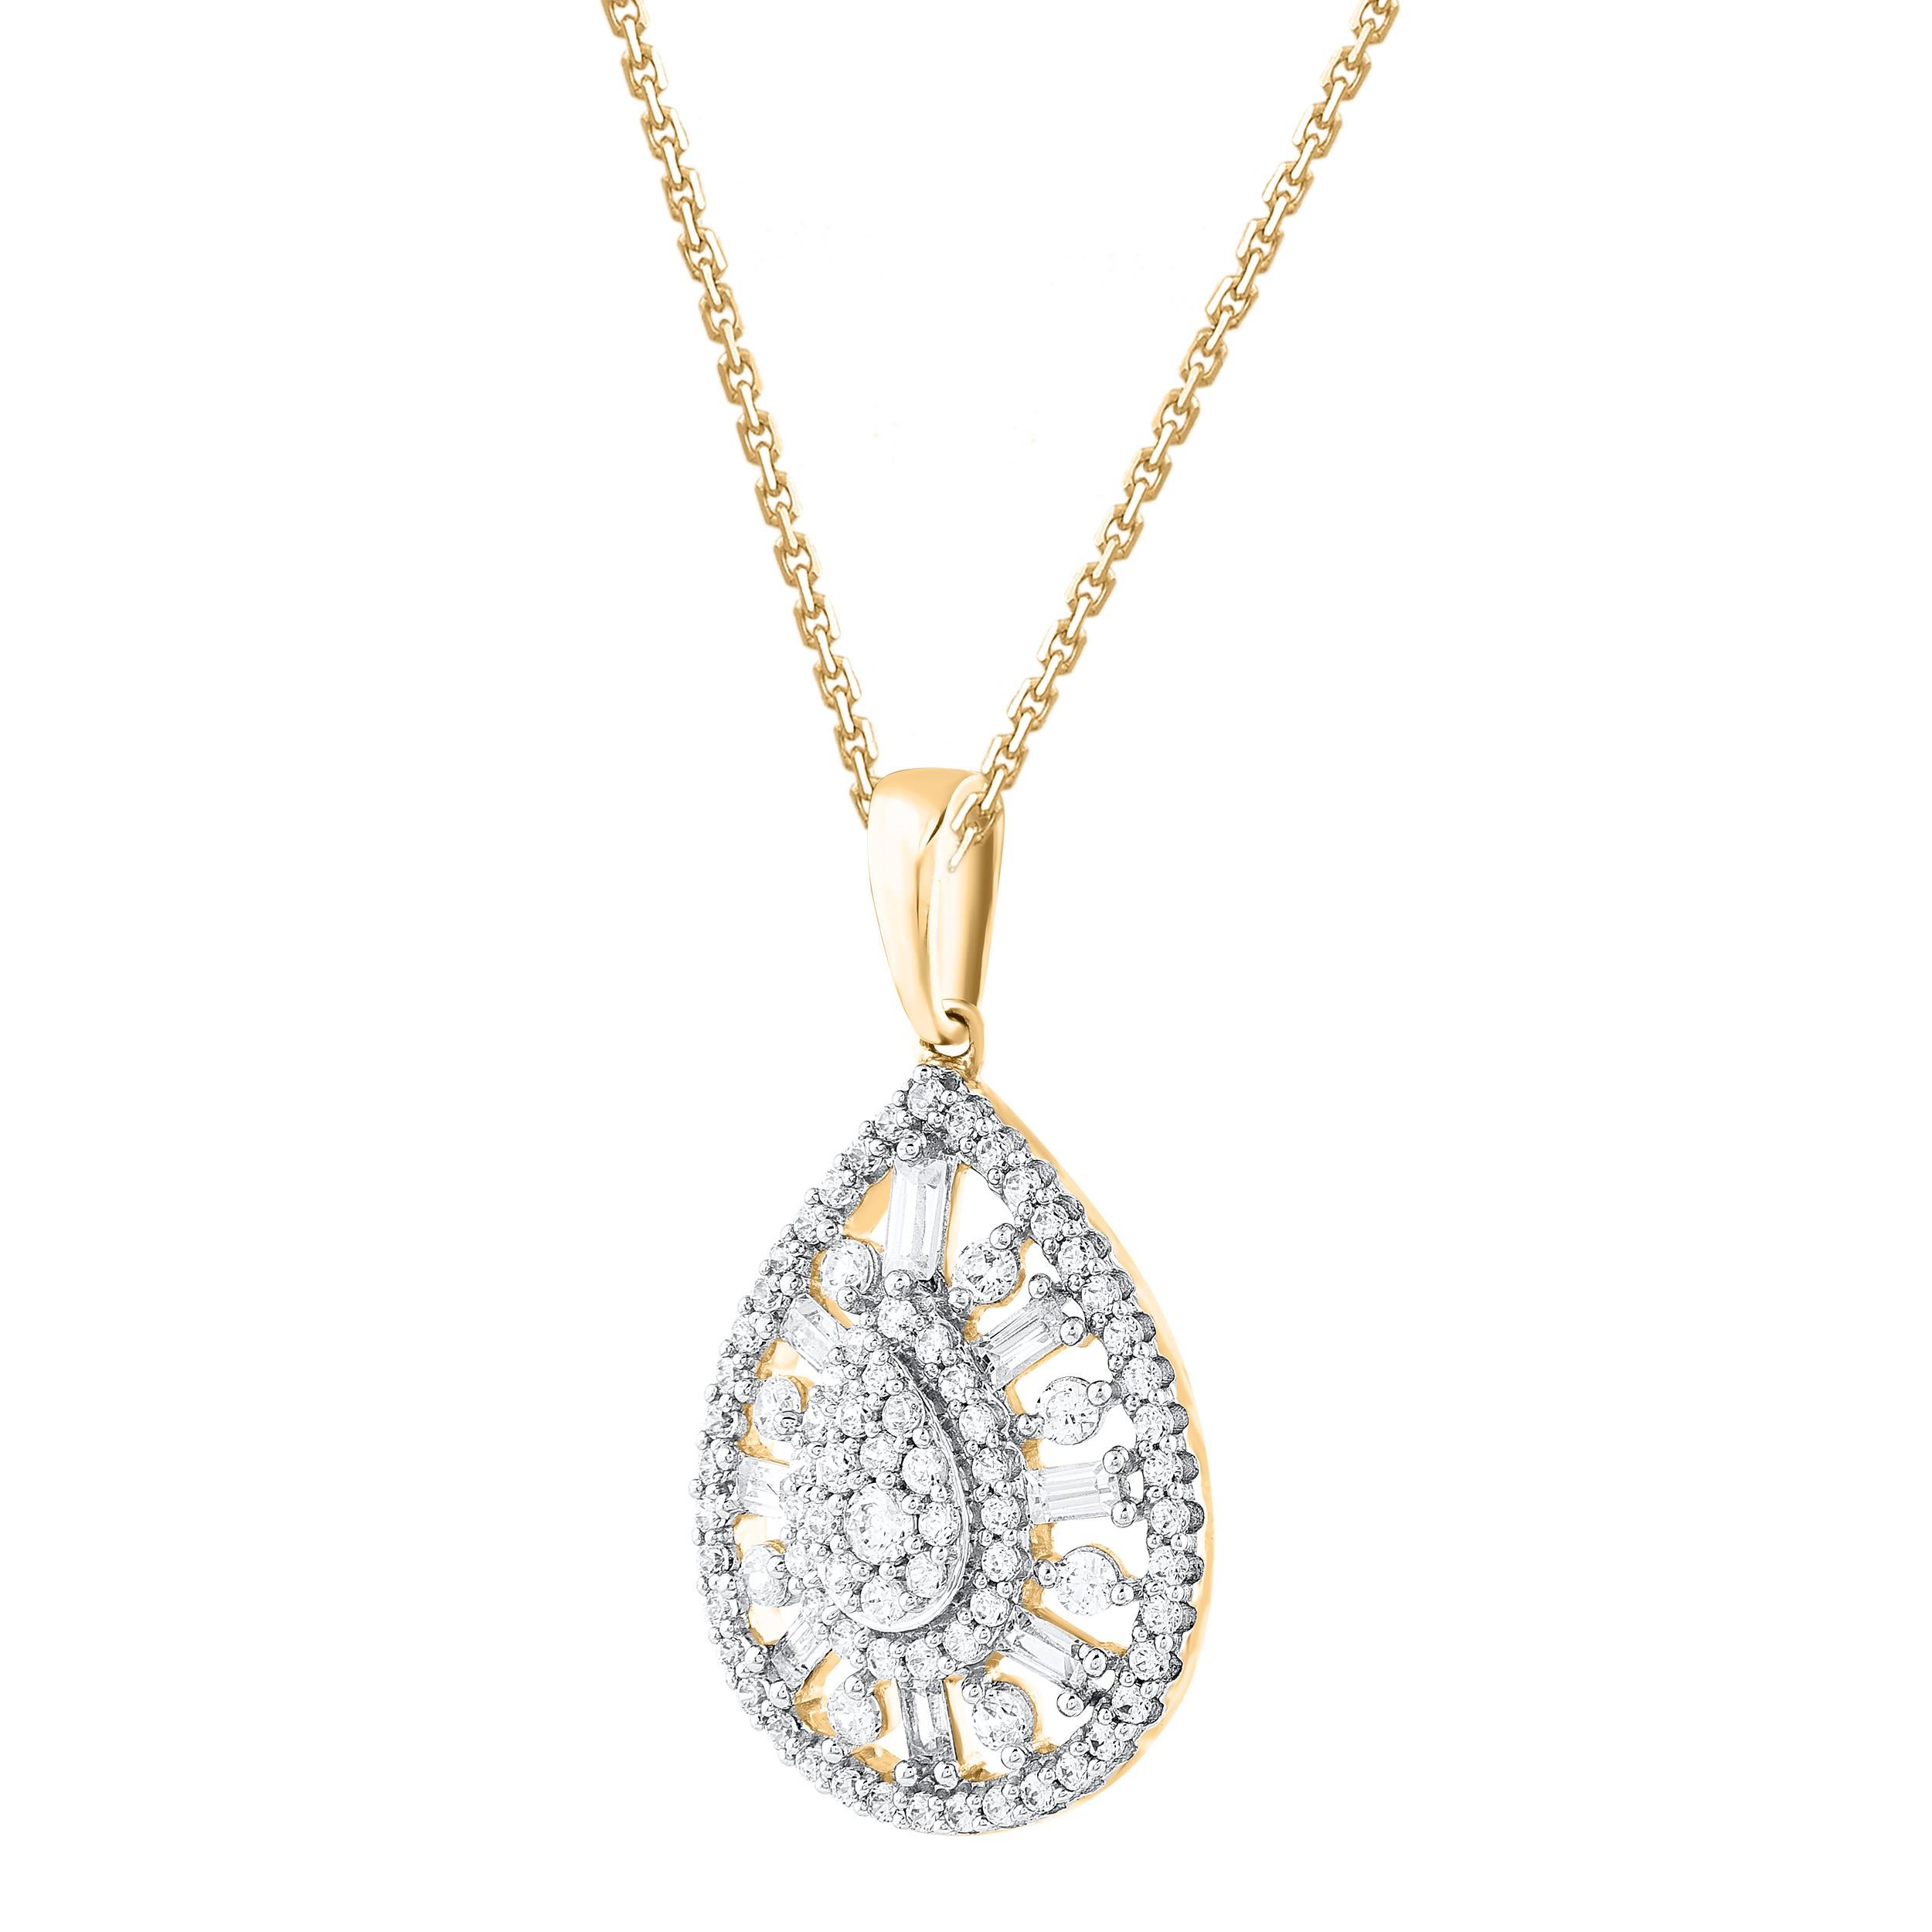 The beautifully studded brilliant cut & baguette diamonds truly make this pear shaped drop pendant captivating. Designed in 14 kt yellow gold, studded with 88 brilliant-cut & baguette diamonds in prong & half channel setting. it will come along with